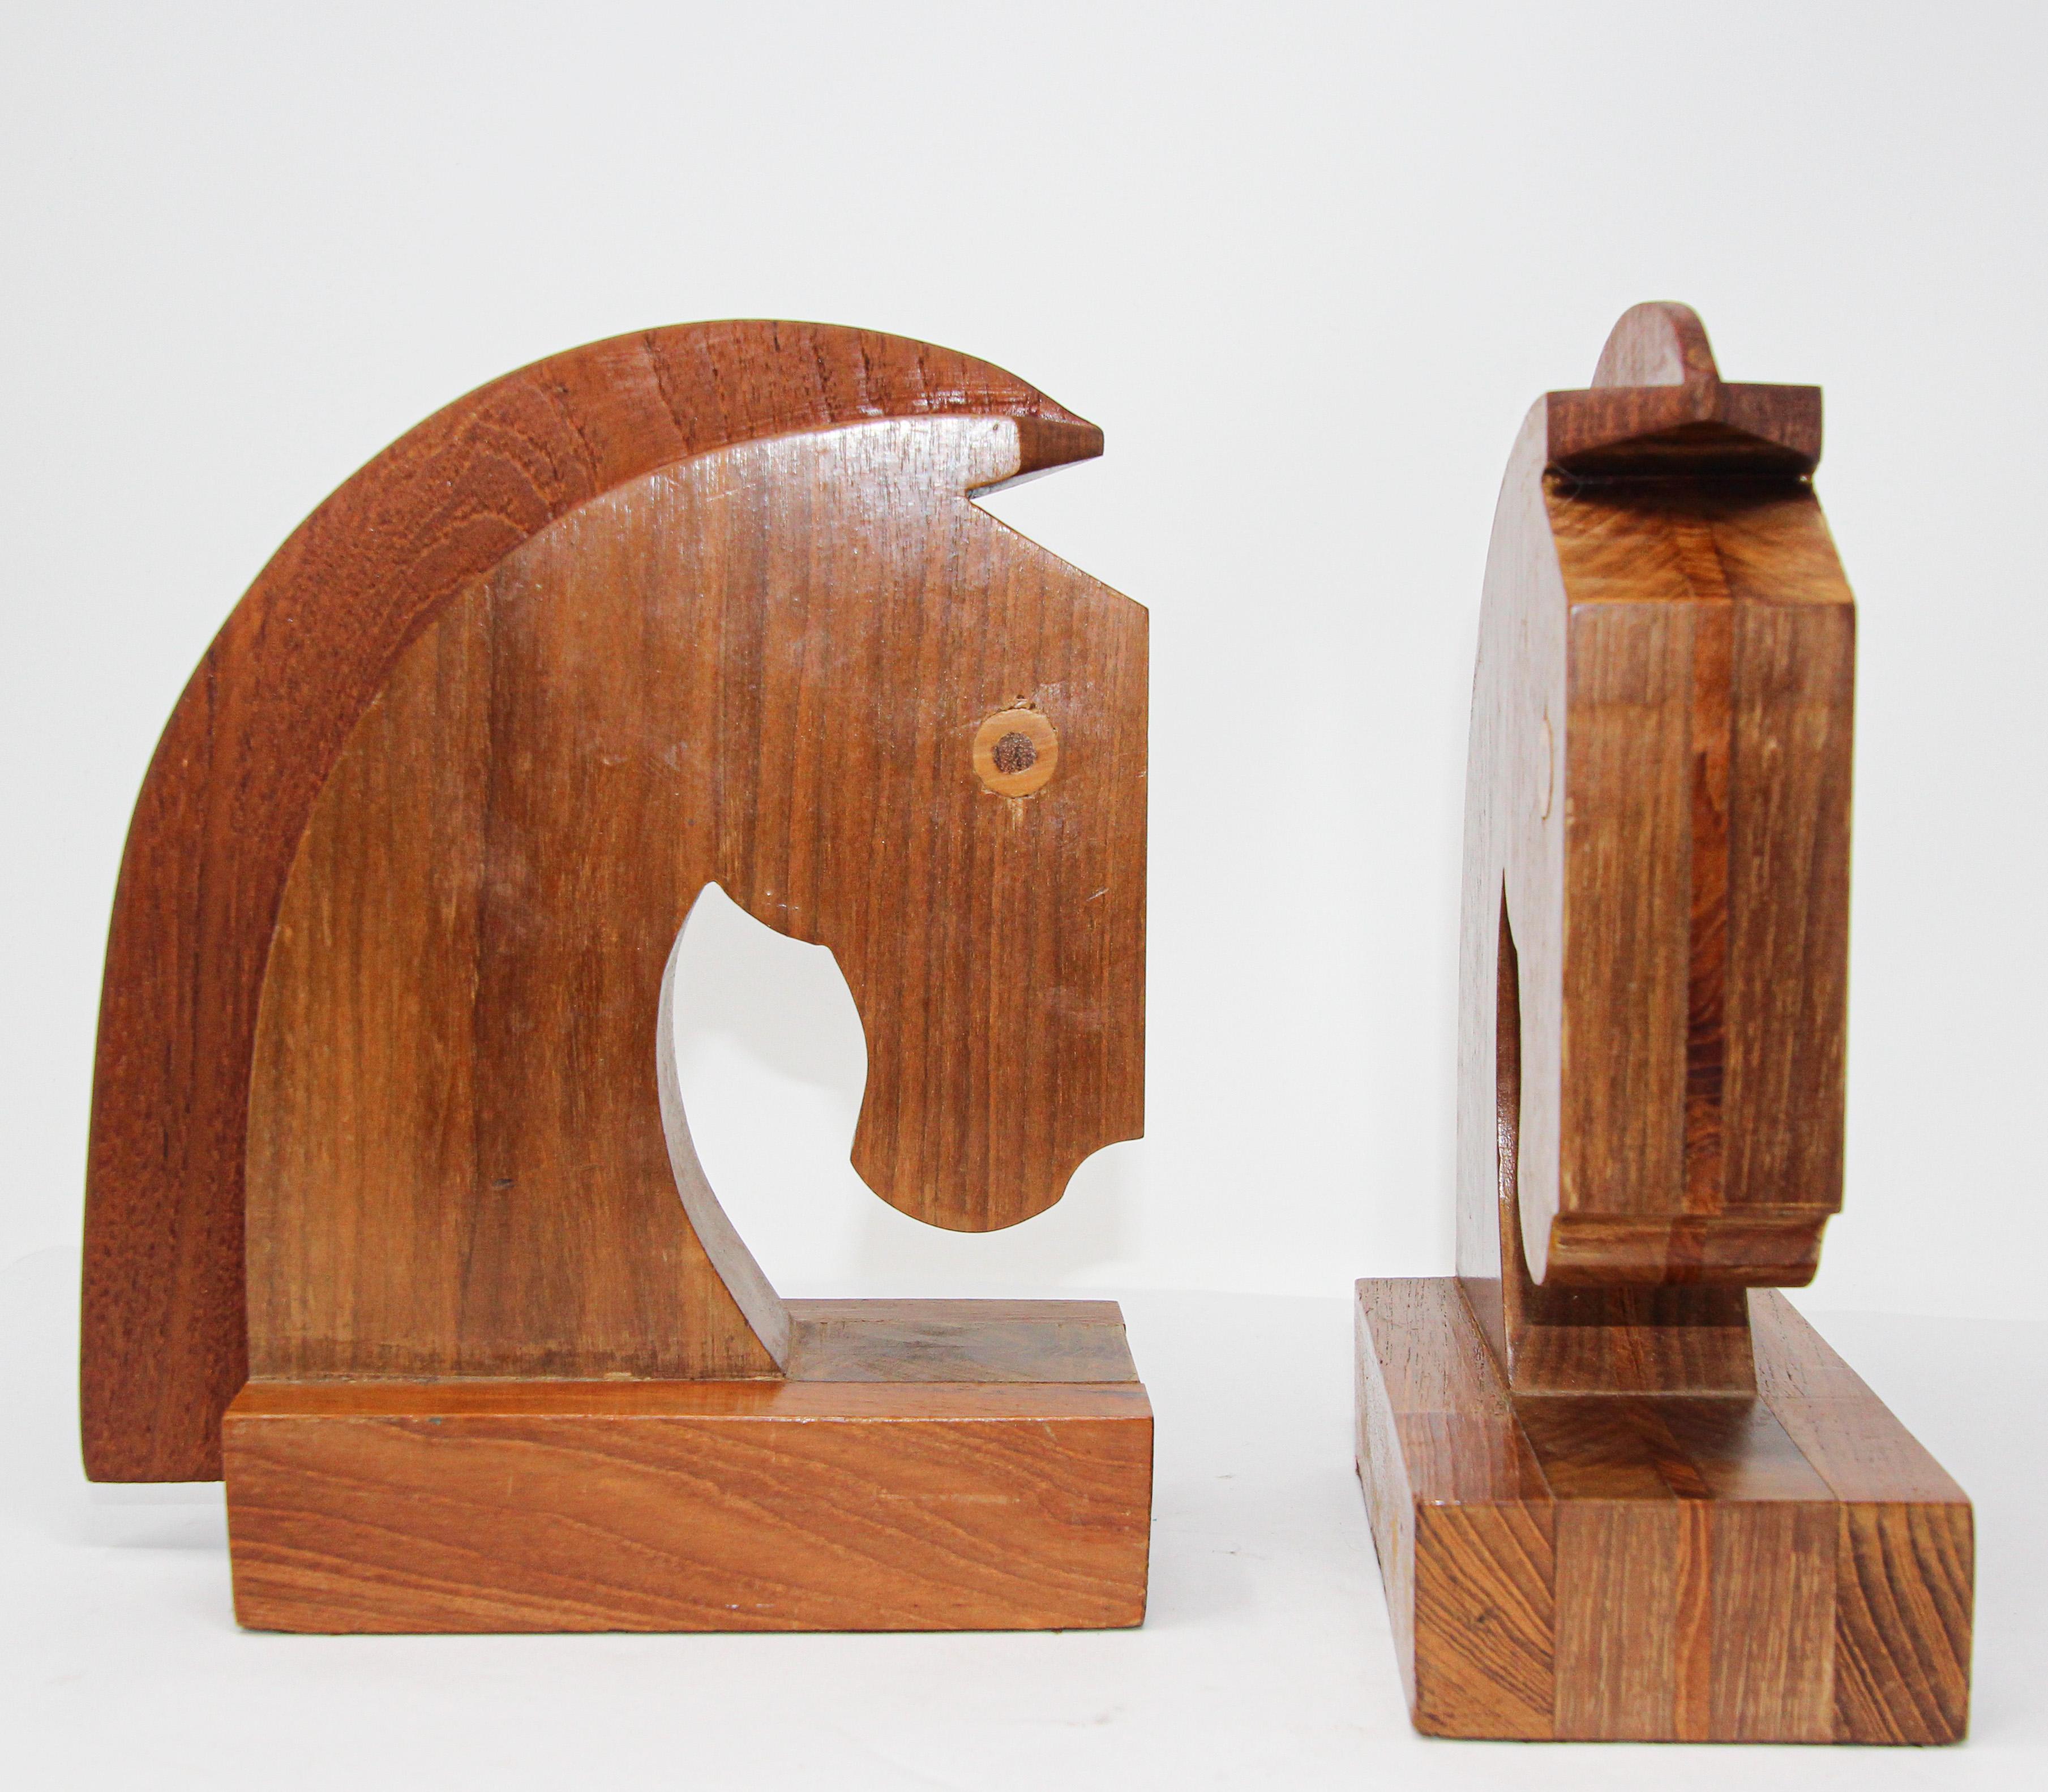 20th Century Art Deco Stylized Wood Sculptures of Horse Bust Bookends For Sale